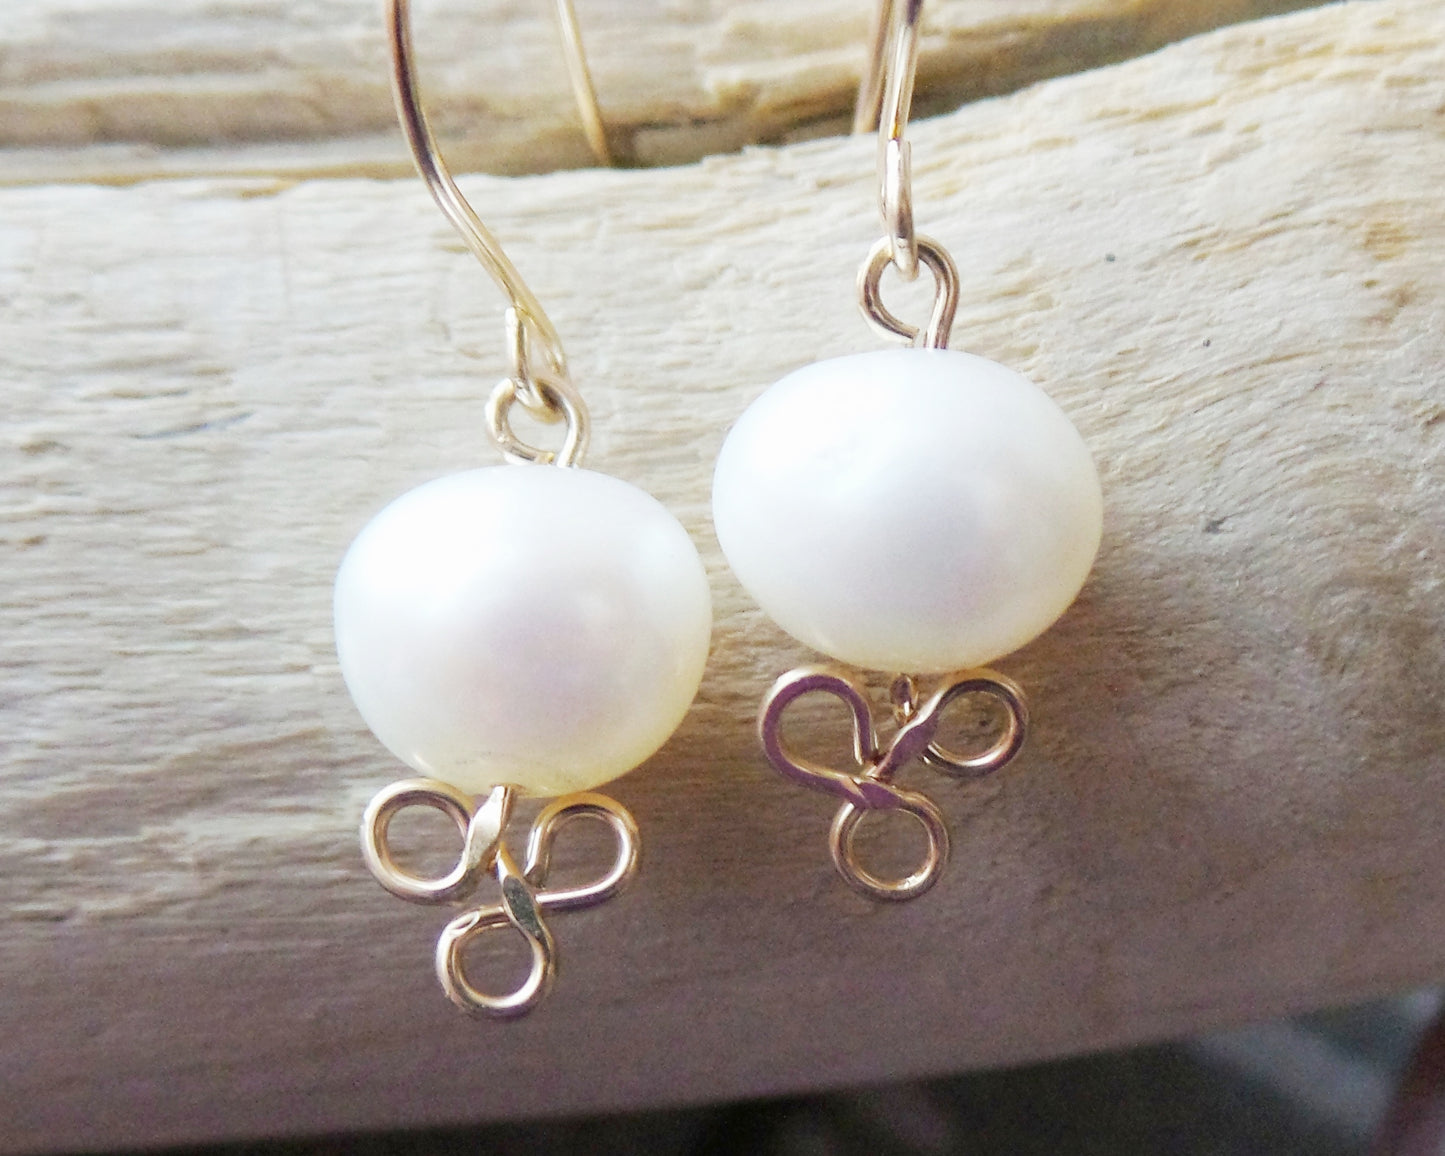 Golden Trinity Knot Pearl Earrings handmade with Freshwater Cultured Pearls 14k Gold Filled  